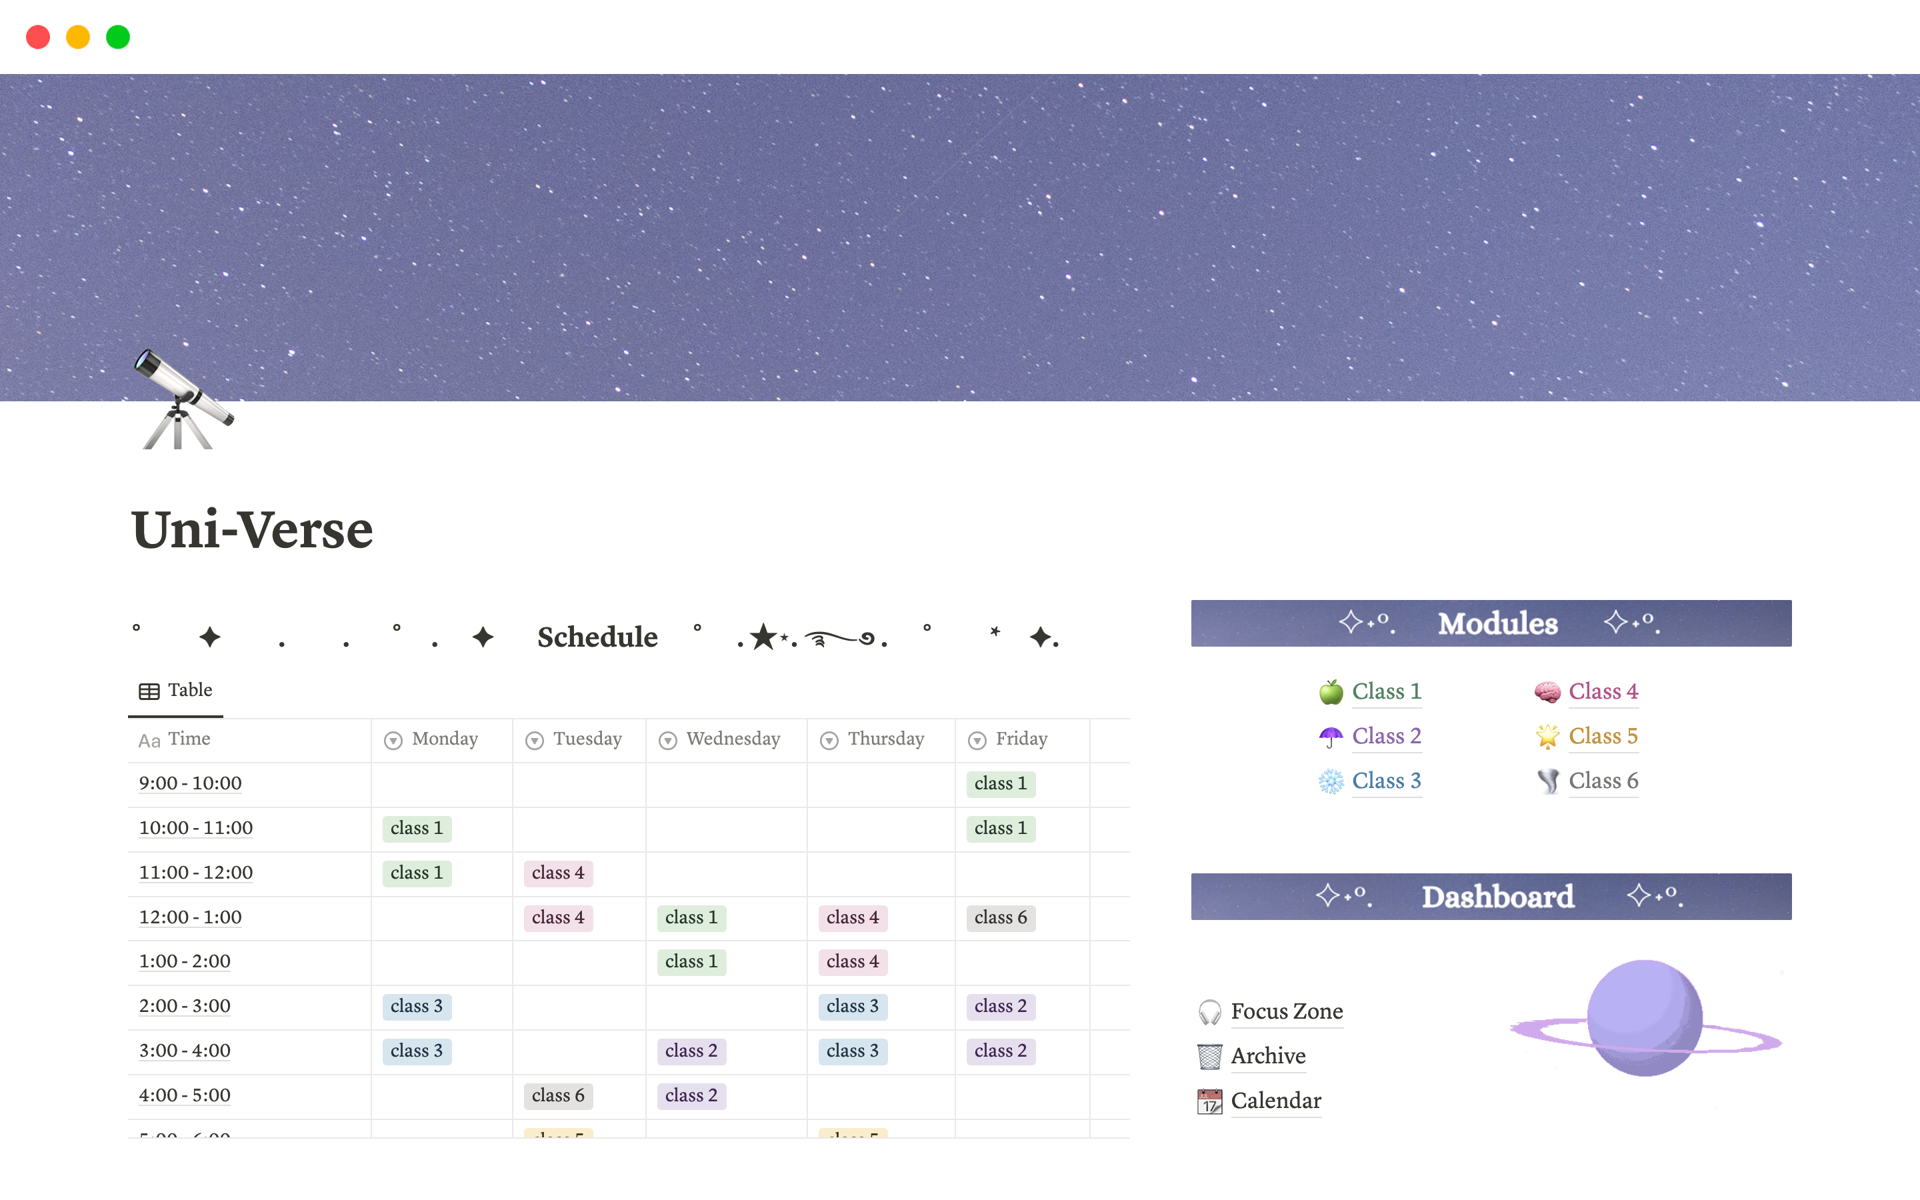 Explore Uni-Verse, the space-themed Notion template designed for students